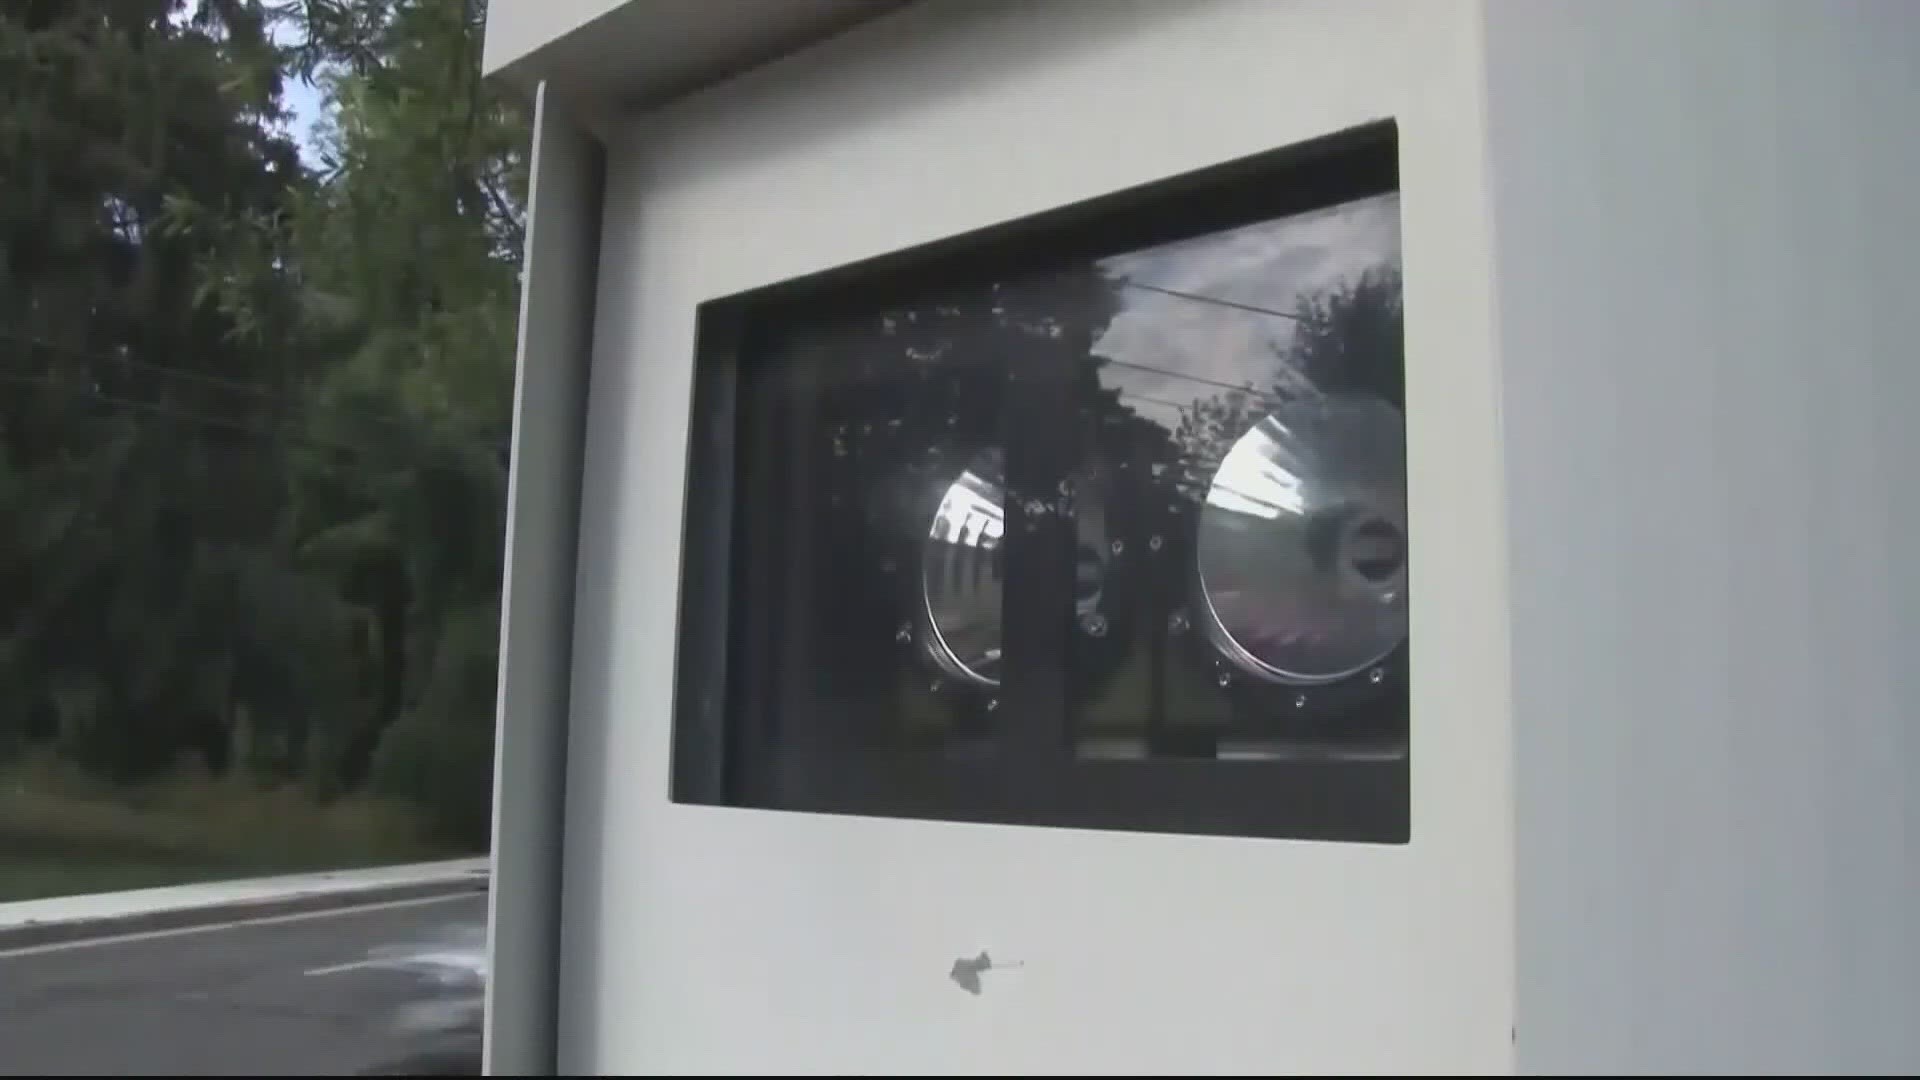 Some elected leaders want to make sure dollars from the new traffic cameras go to improving traffic safety.